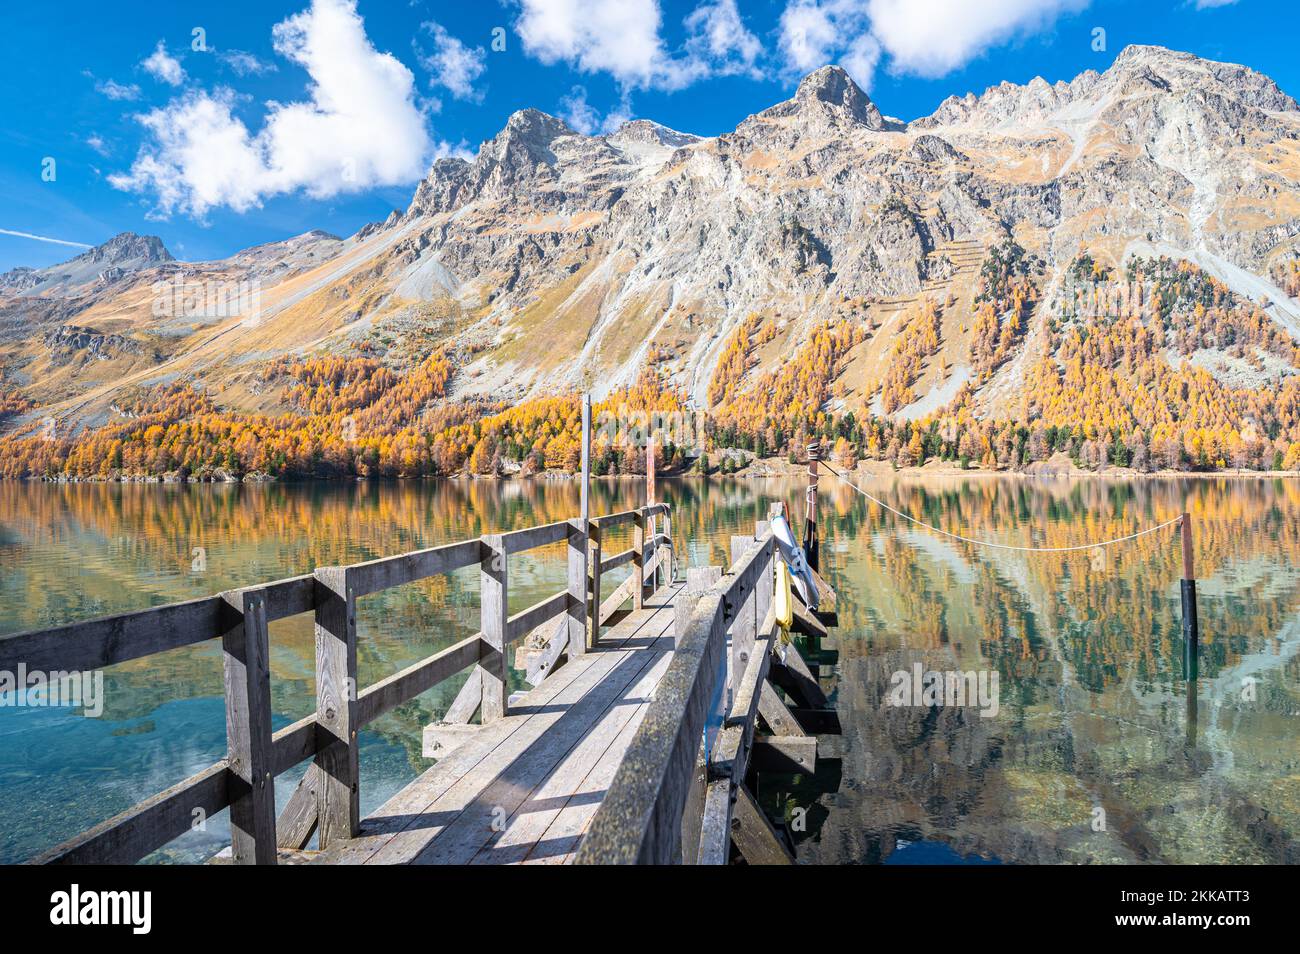 Wooden jetty in the water of Lake Sils, Switzerland with beautiful mountains covered with larix trees in autumn foliage Stock Photo